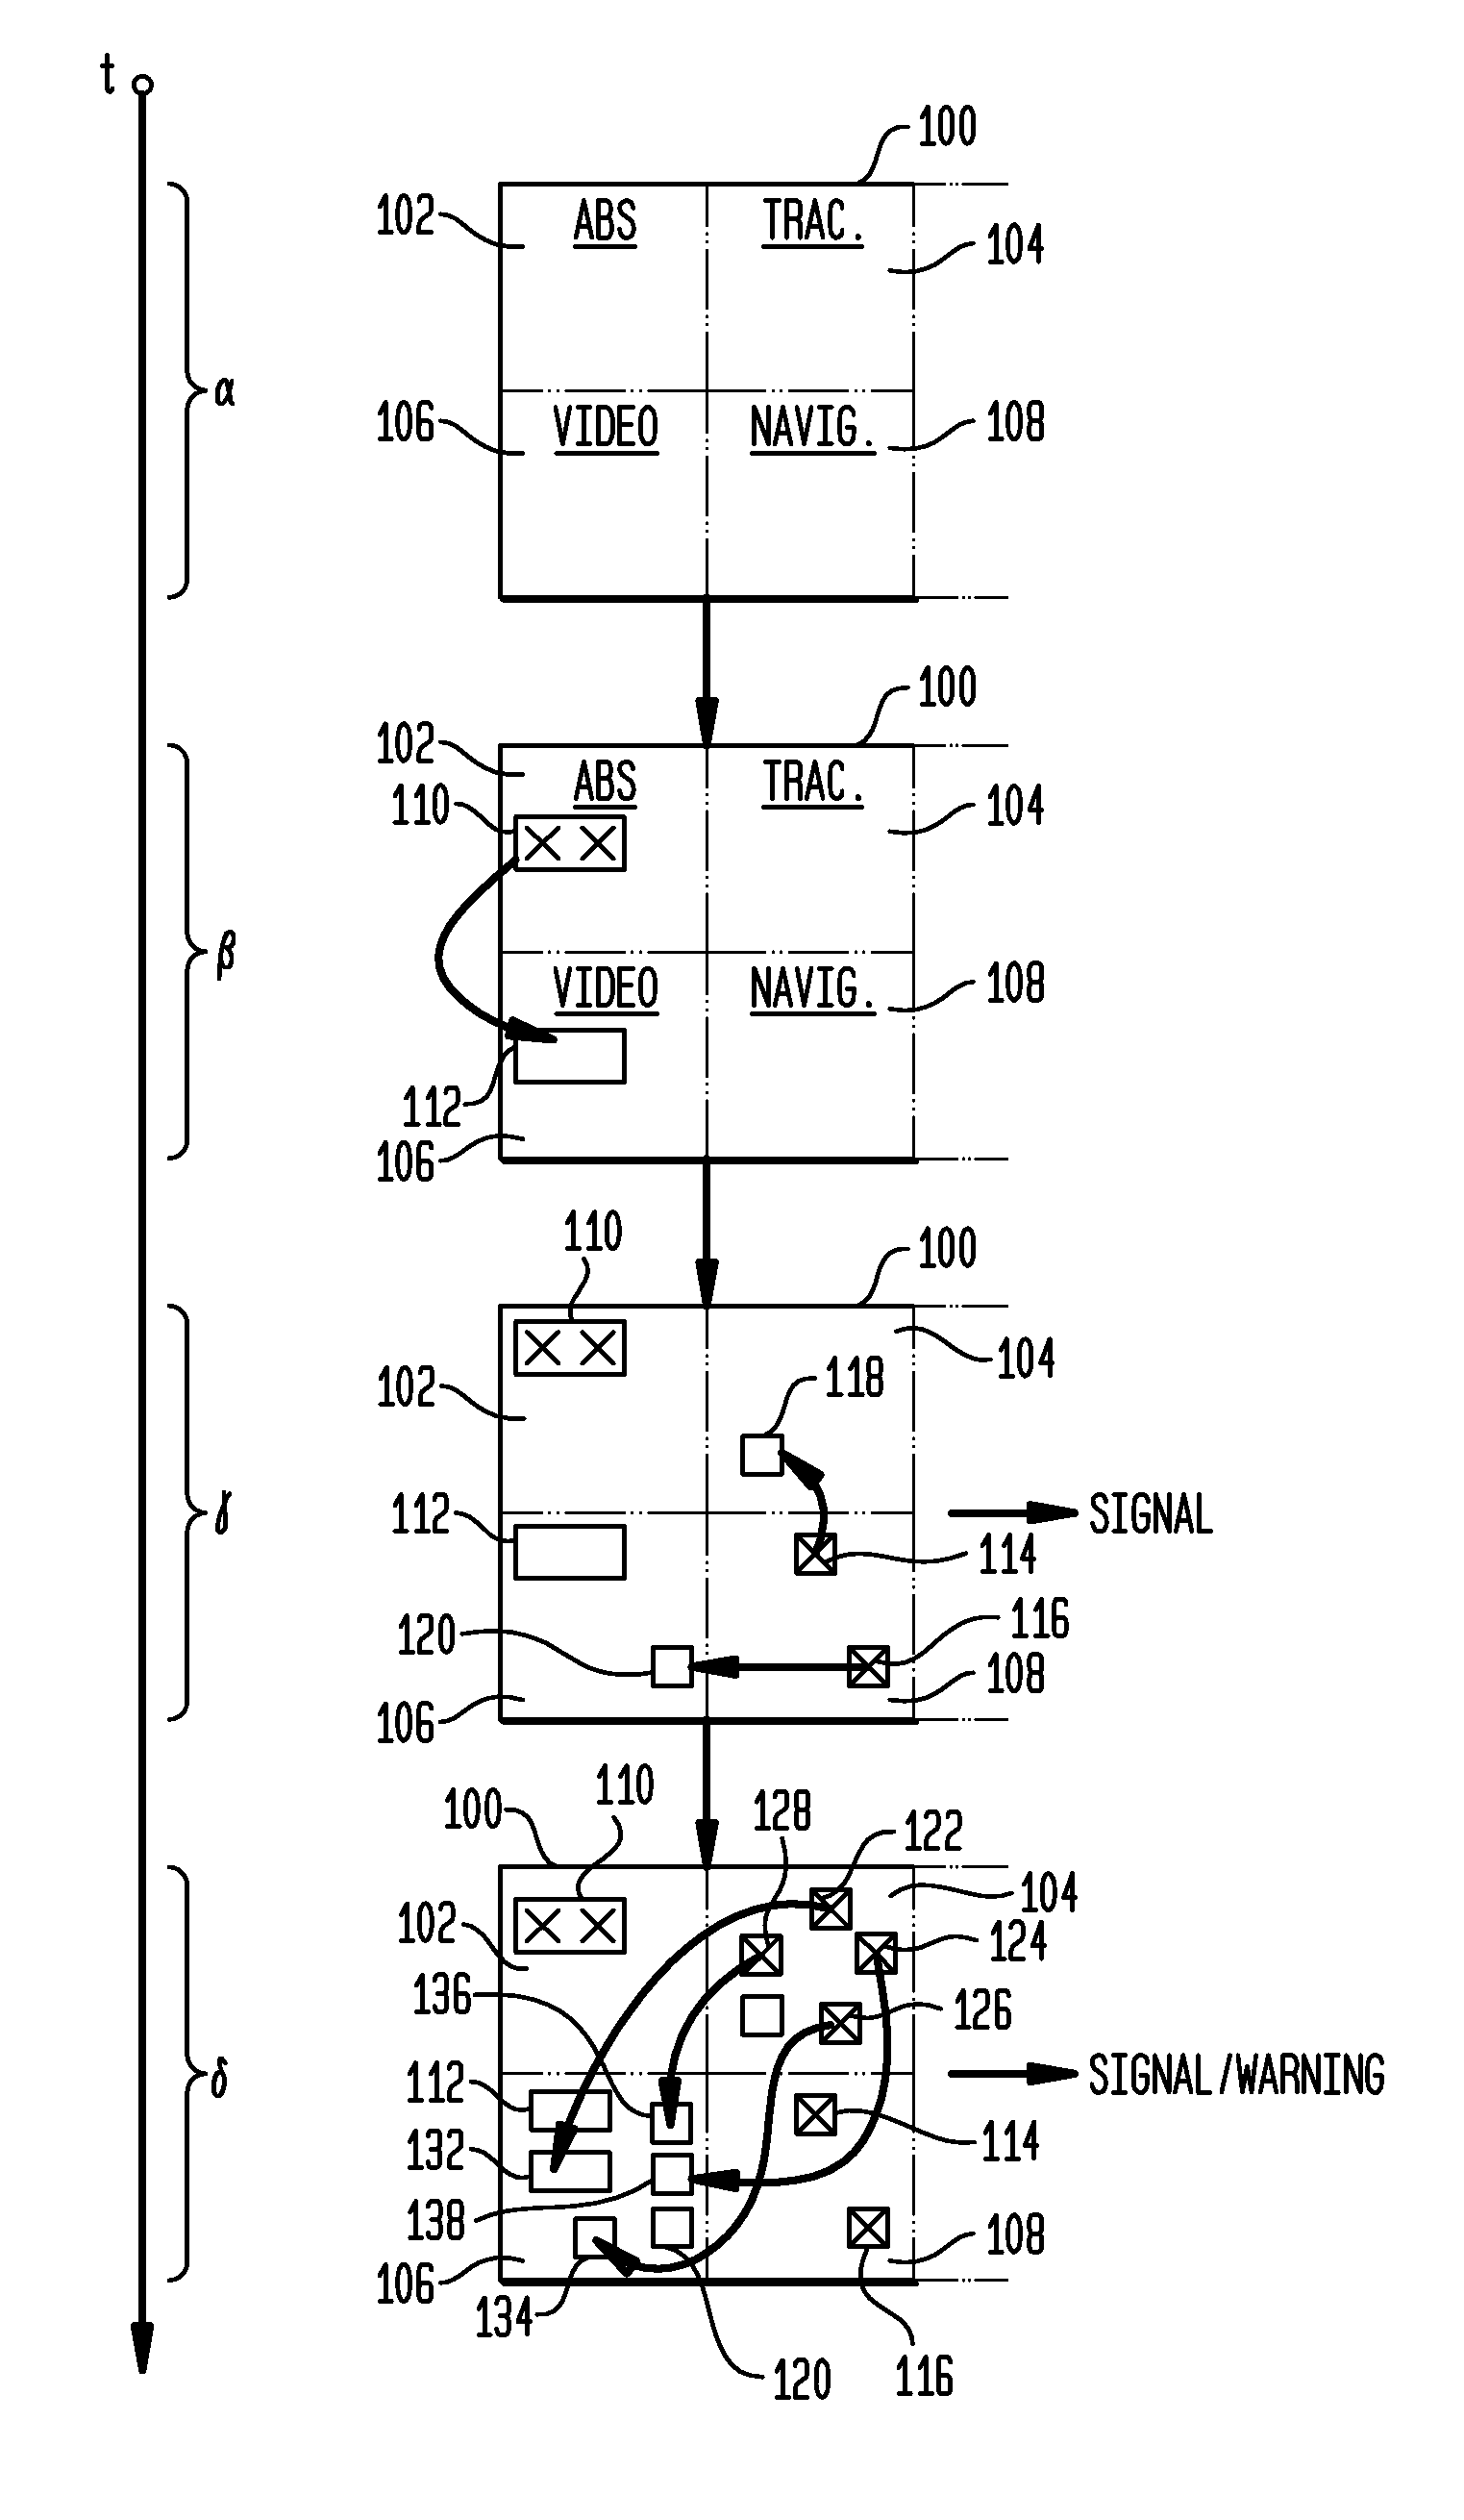 Element Controller for a Resilient Integrated Circuit Architecture